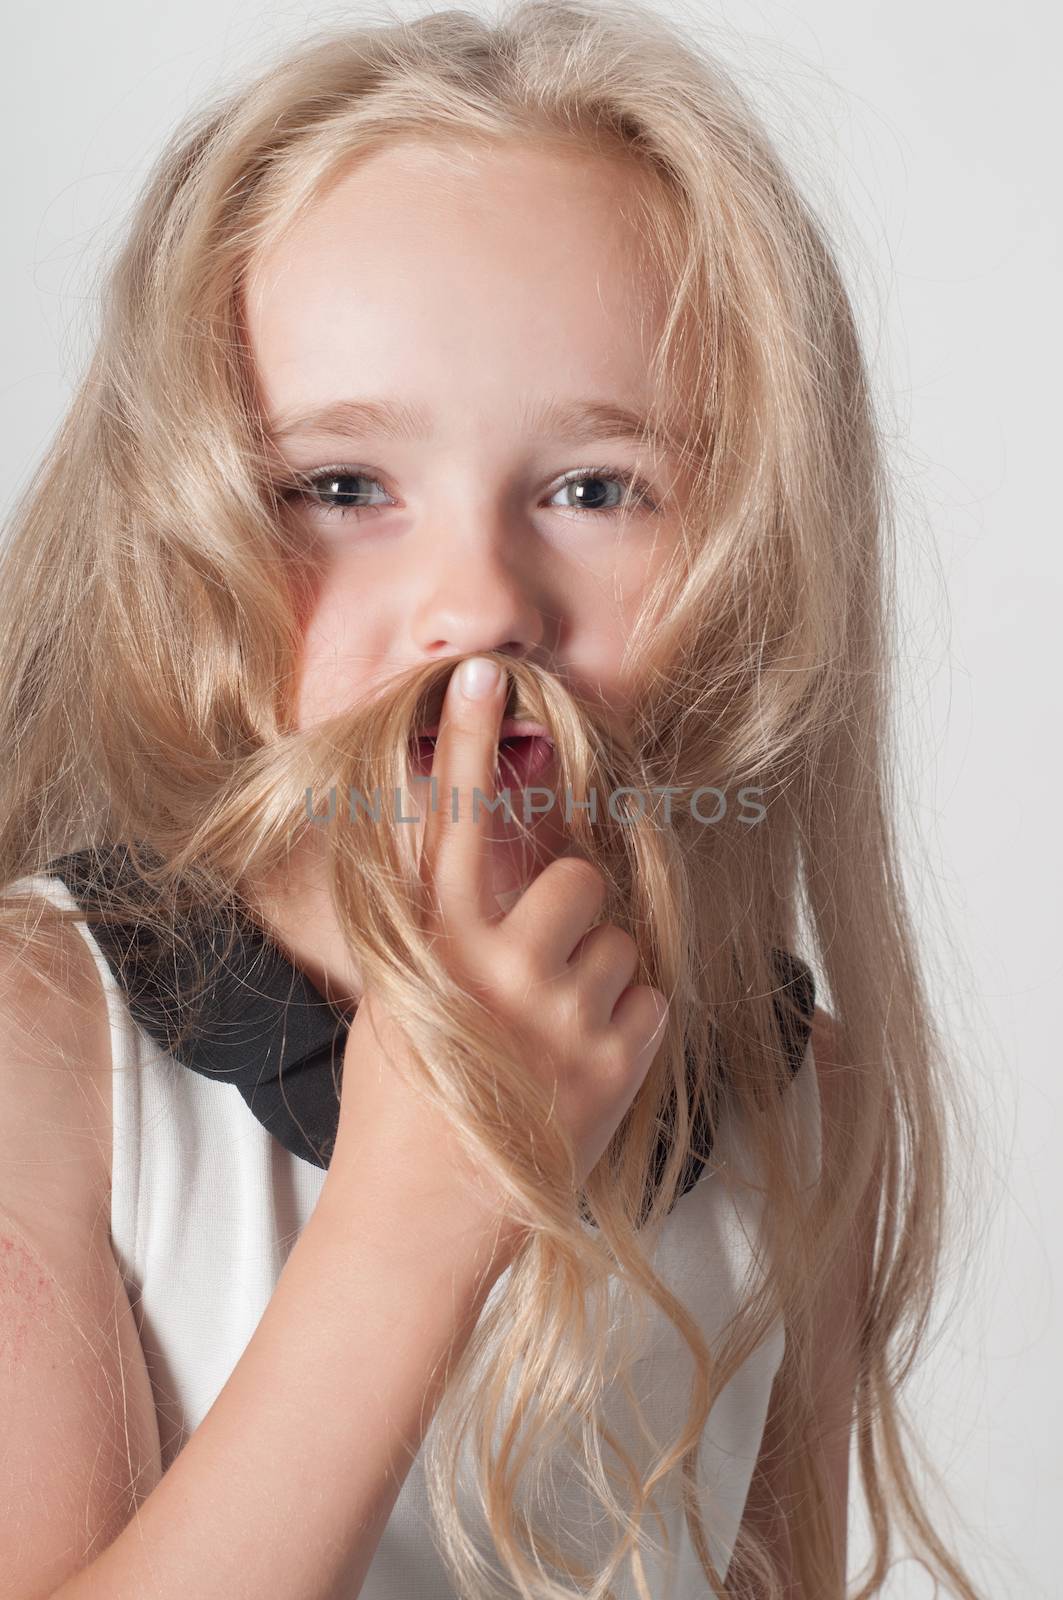 Little girl with long hair fooling around in studio